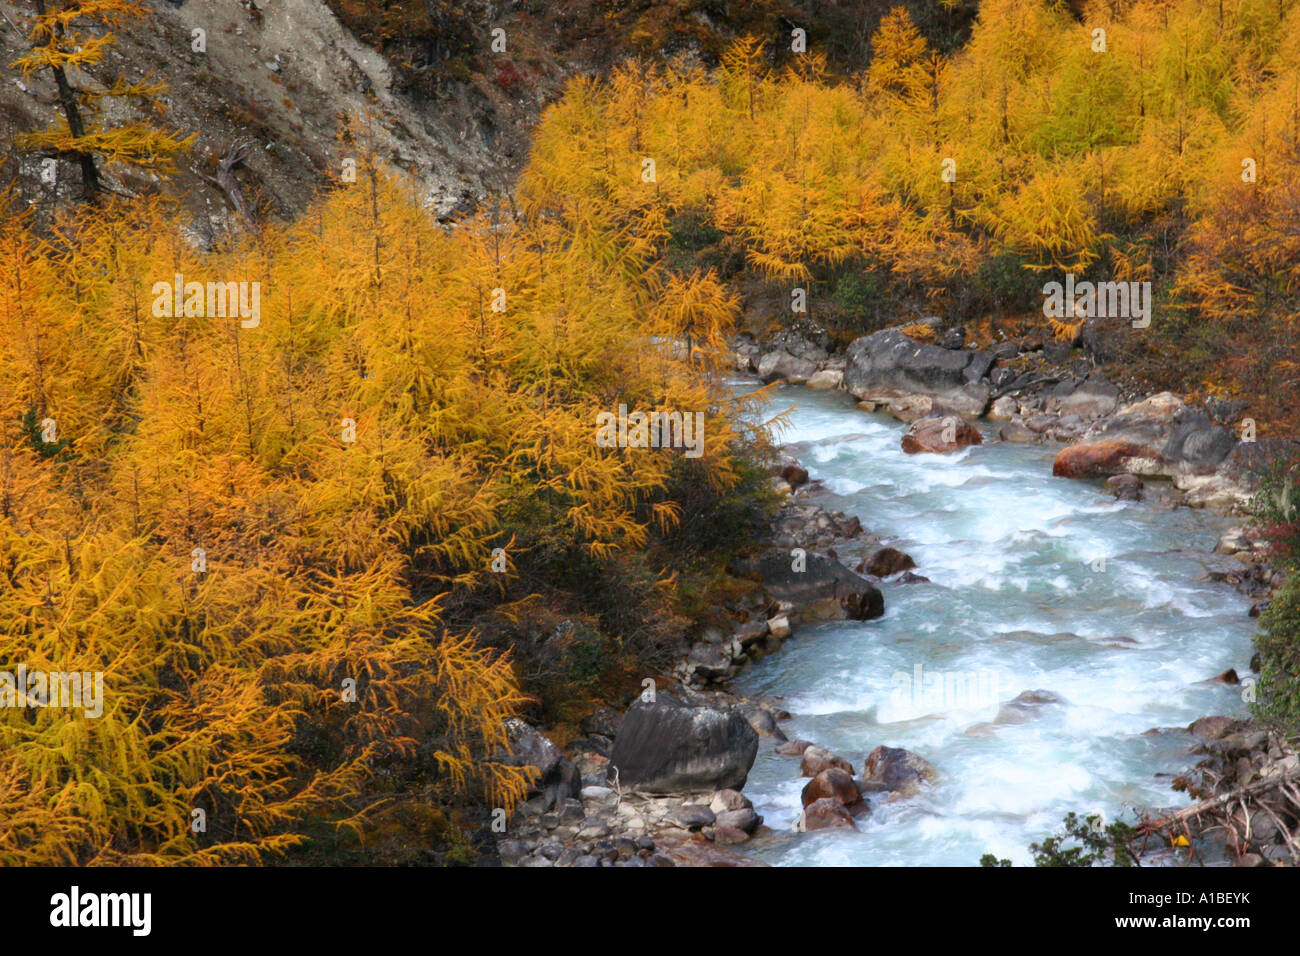 The river Paro Chuu rushes through a stand of tamaracks or larches (Larix griffithii) in Bhutan. Stock Photo